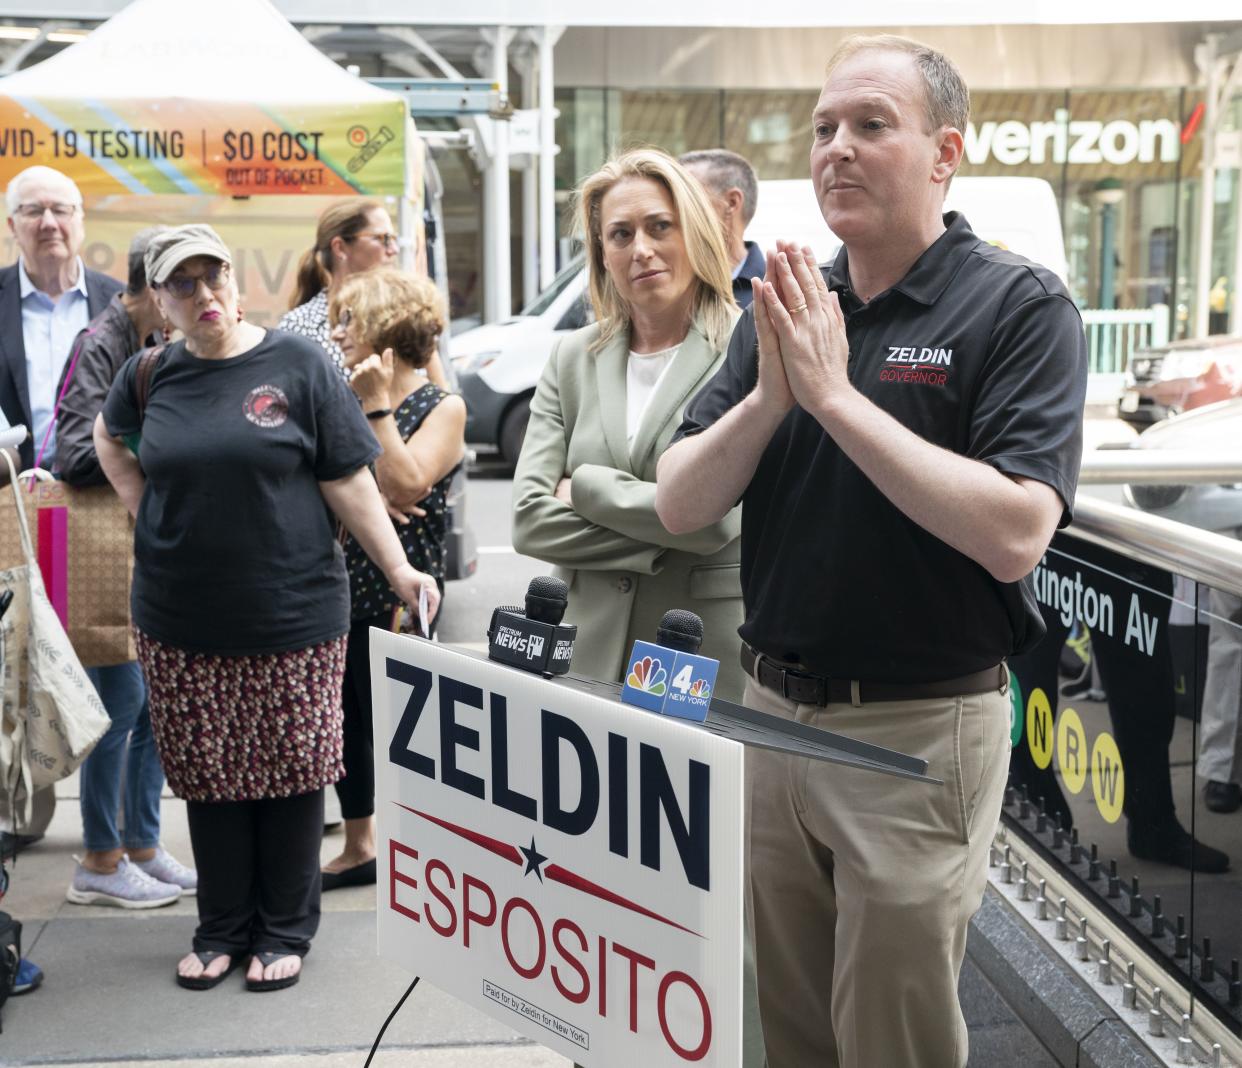 New York Republican candidate for governor Rep. Lee Zeldin and Republican Lt. Gov. candidate Alison Esposito hold a press conference at Lexington Ave. and 59th St. in Manhattan on Friday, Sept, 16. 